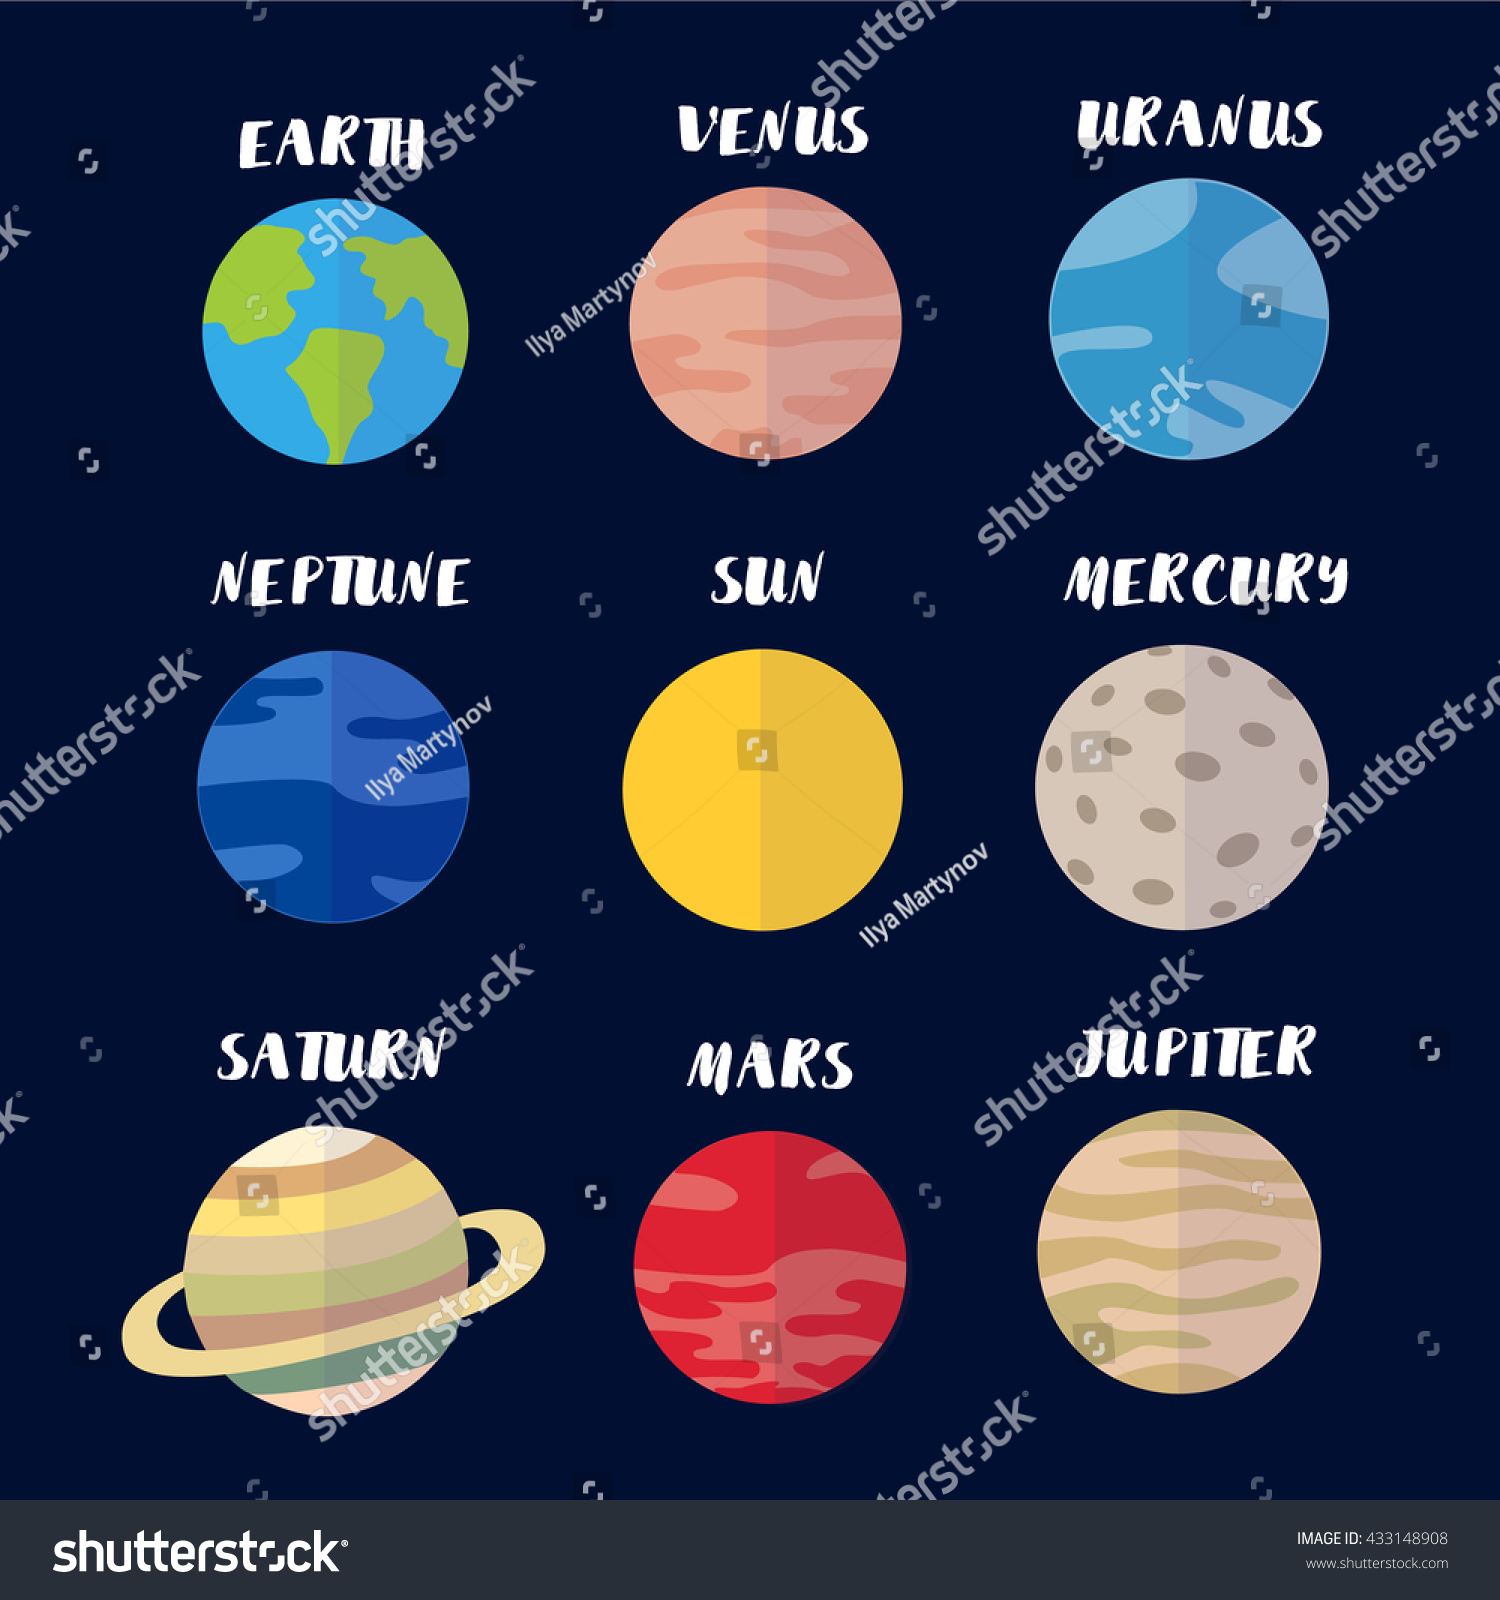 Planets Flat Stock Vector (Royalty Free) 433148908 | Shutterstock